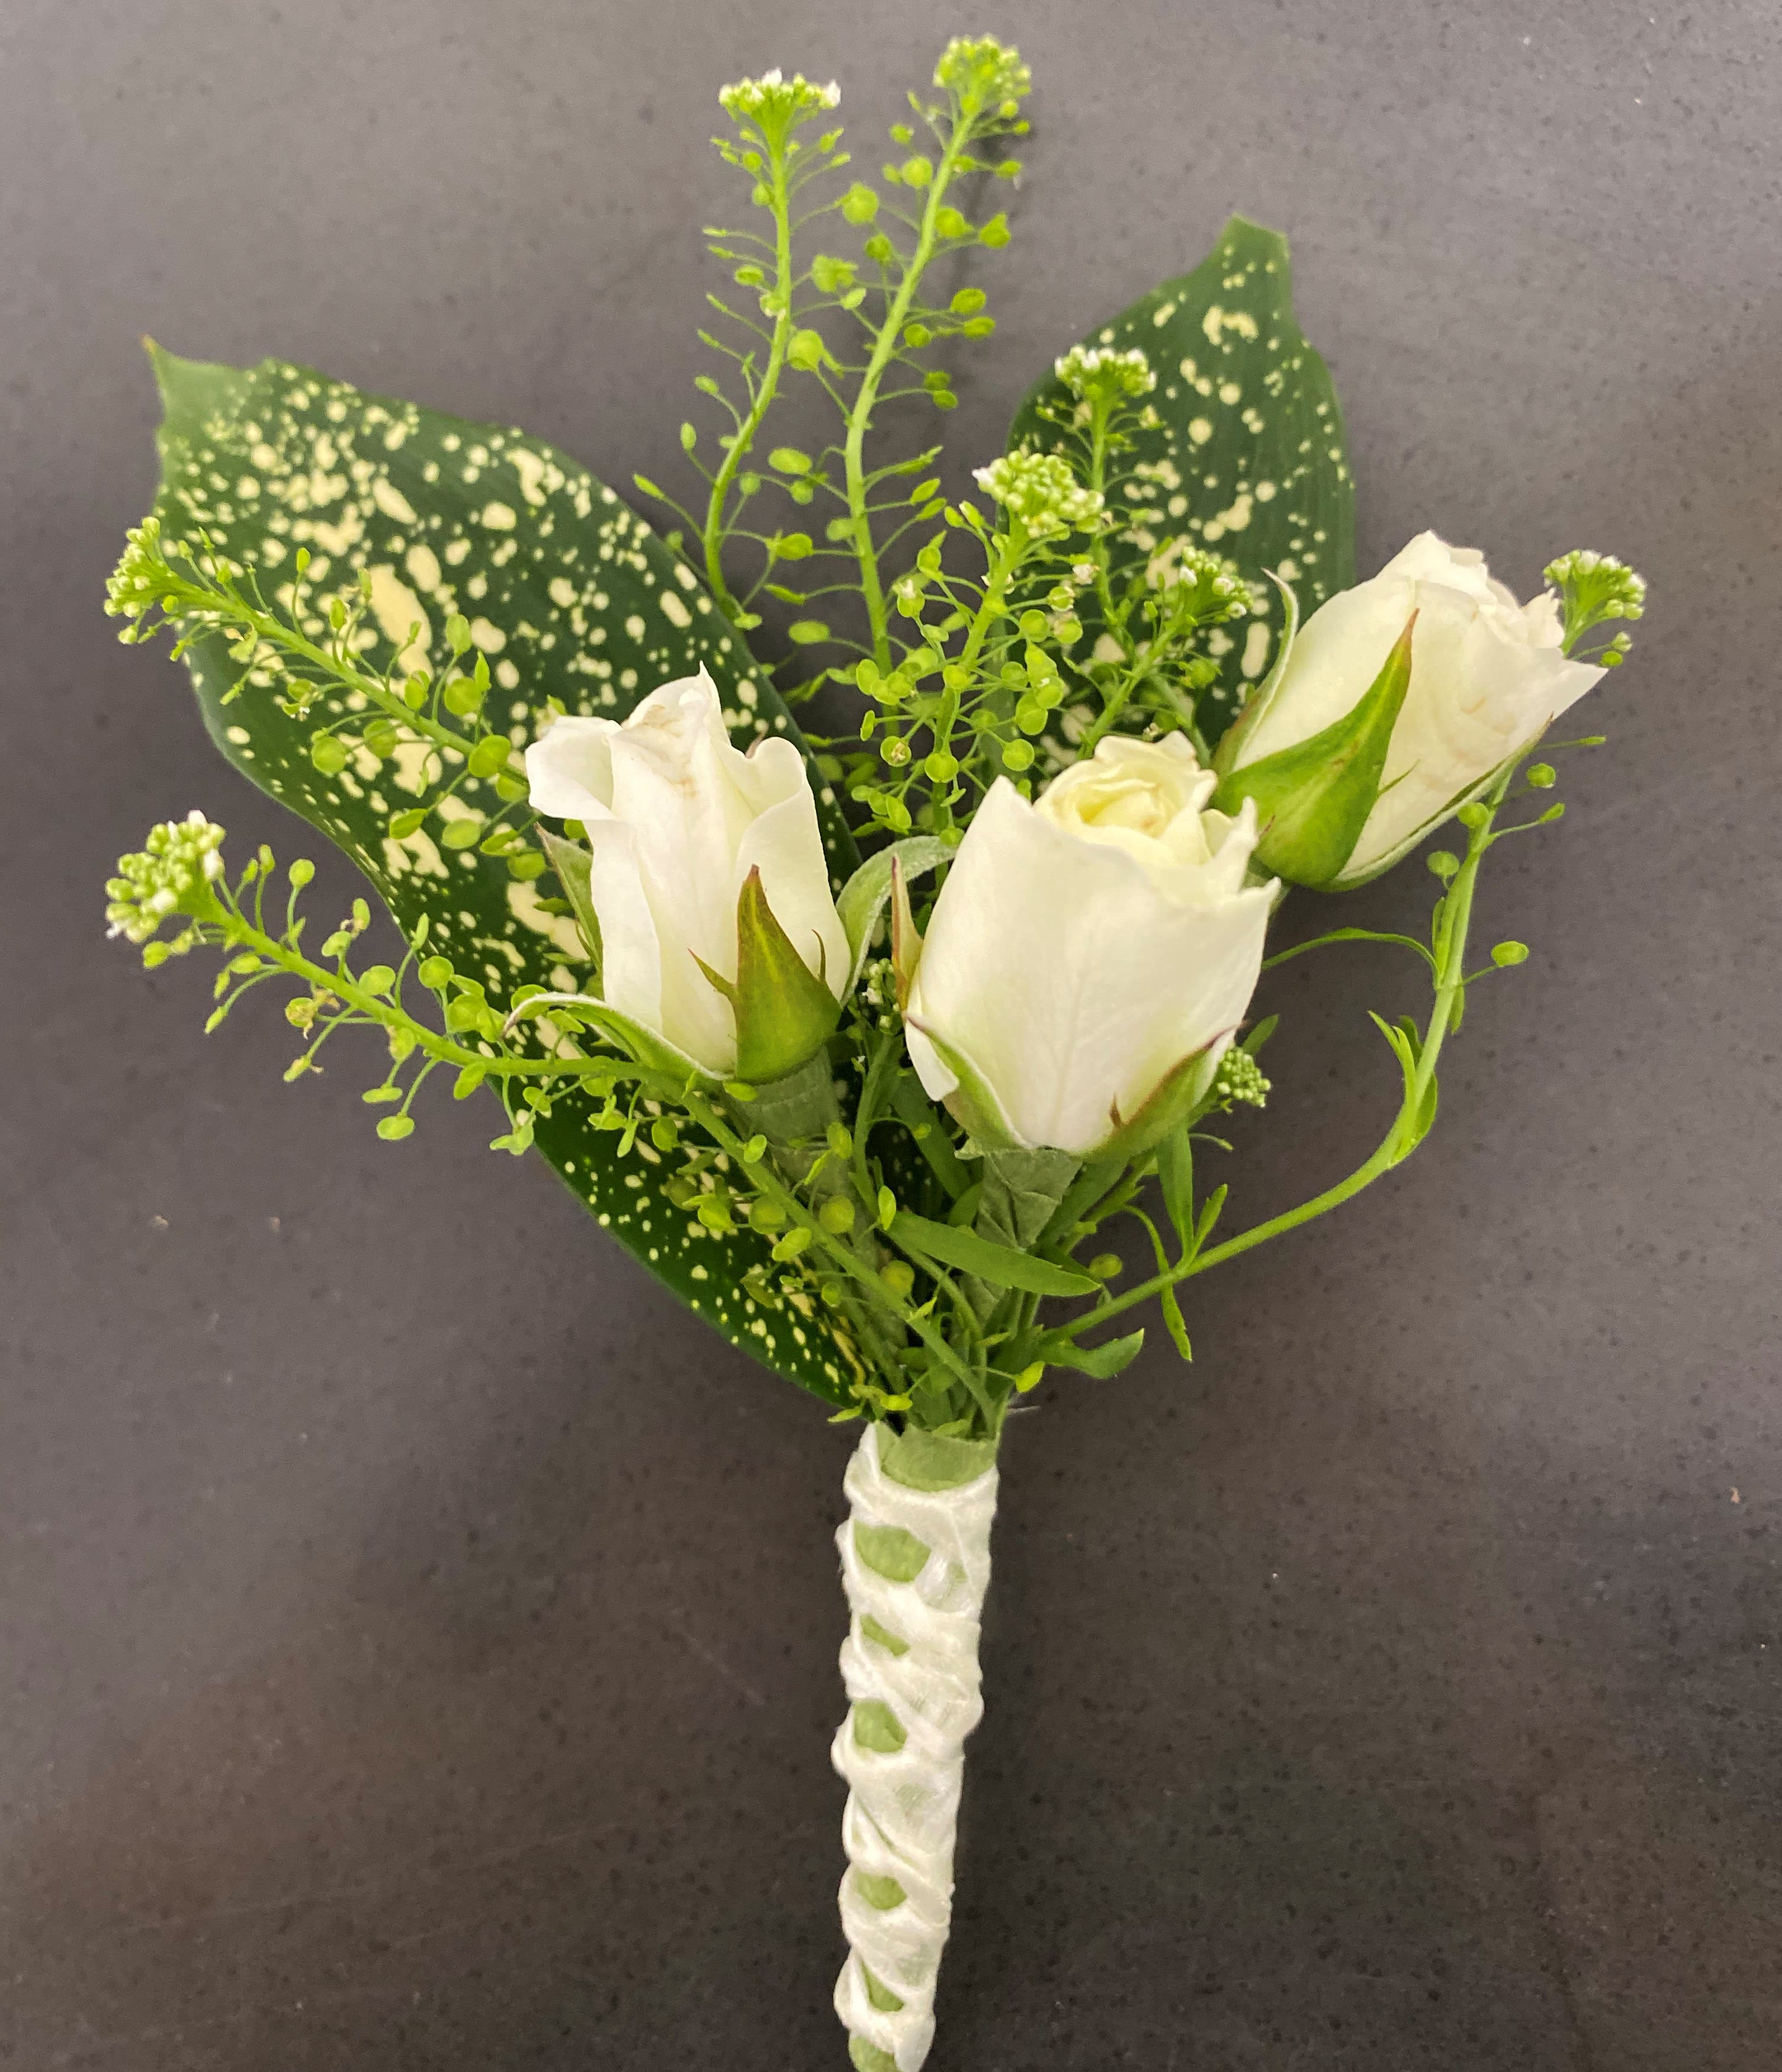 Boutonniere 1 - This Boutonniere has been designed with three spray roses.